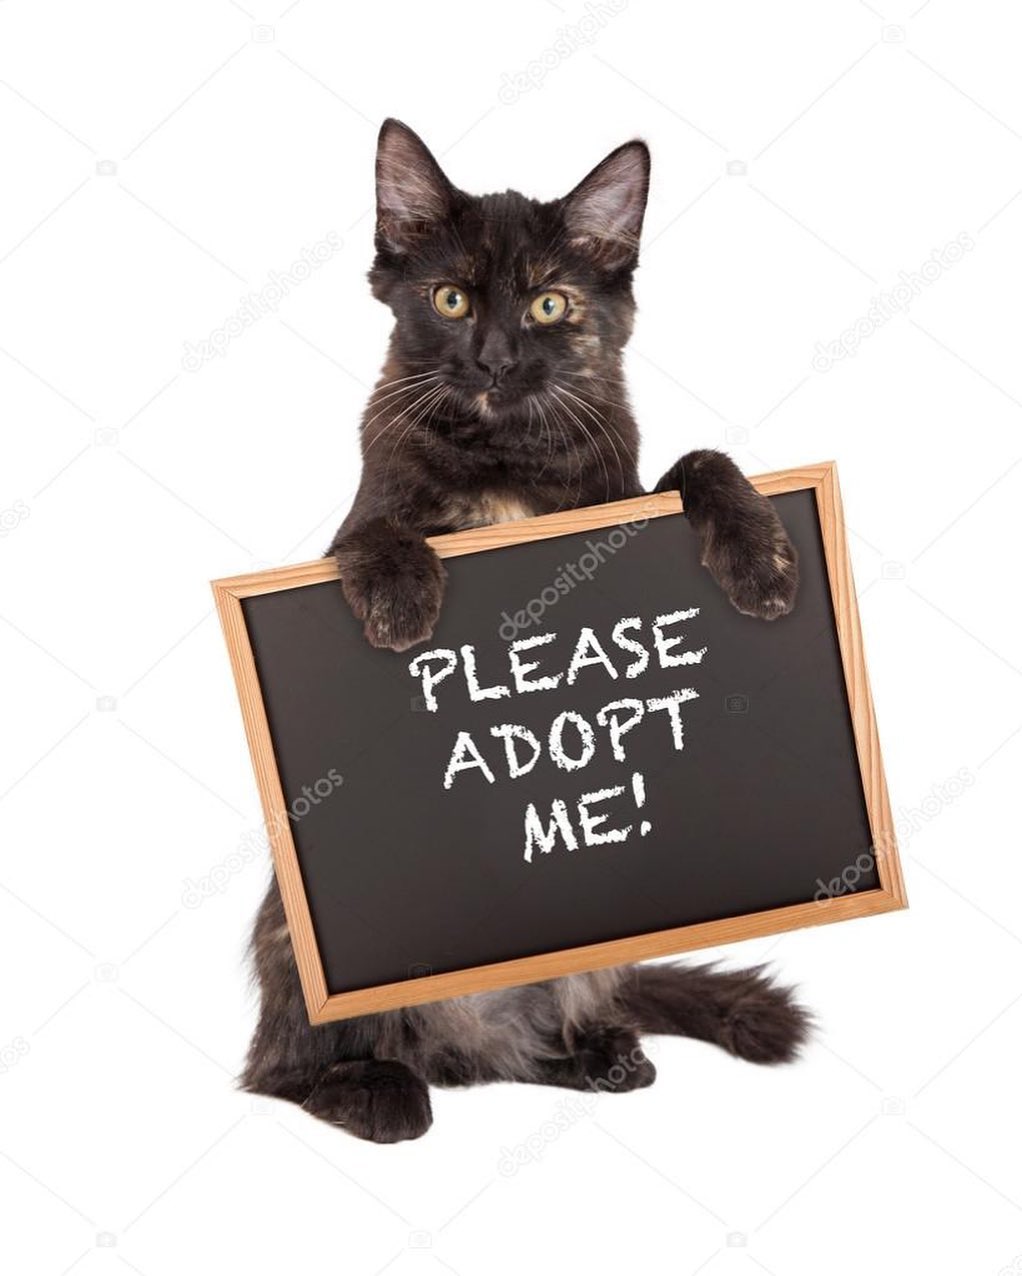 Come find your soulmate,best friend, fur family member Saturday 11-2 at Petsmart 300 rt 18 East Brunswick. To be pre approved please fill out the application on happyhomesinc.org We have a lot of kittens and cats if there is a specific cat you want to me please contact elaine@happyhomesinc.org